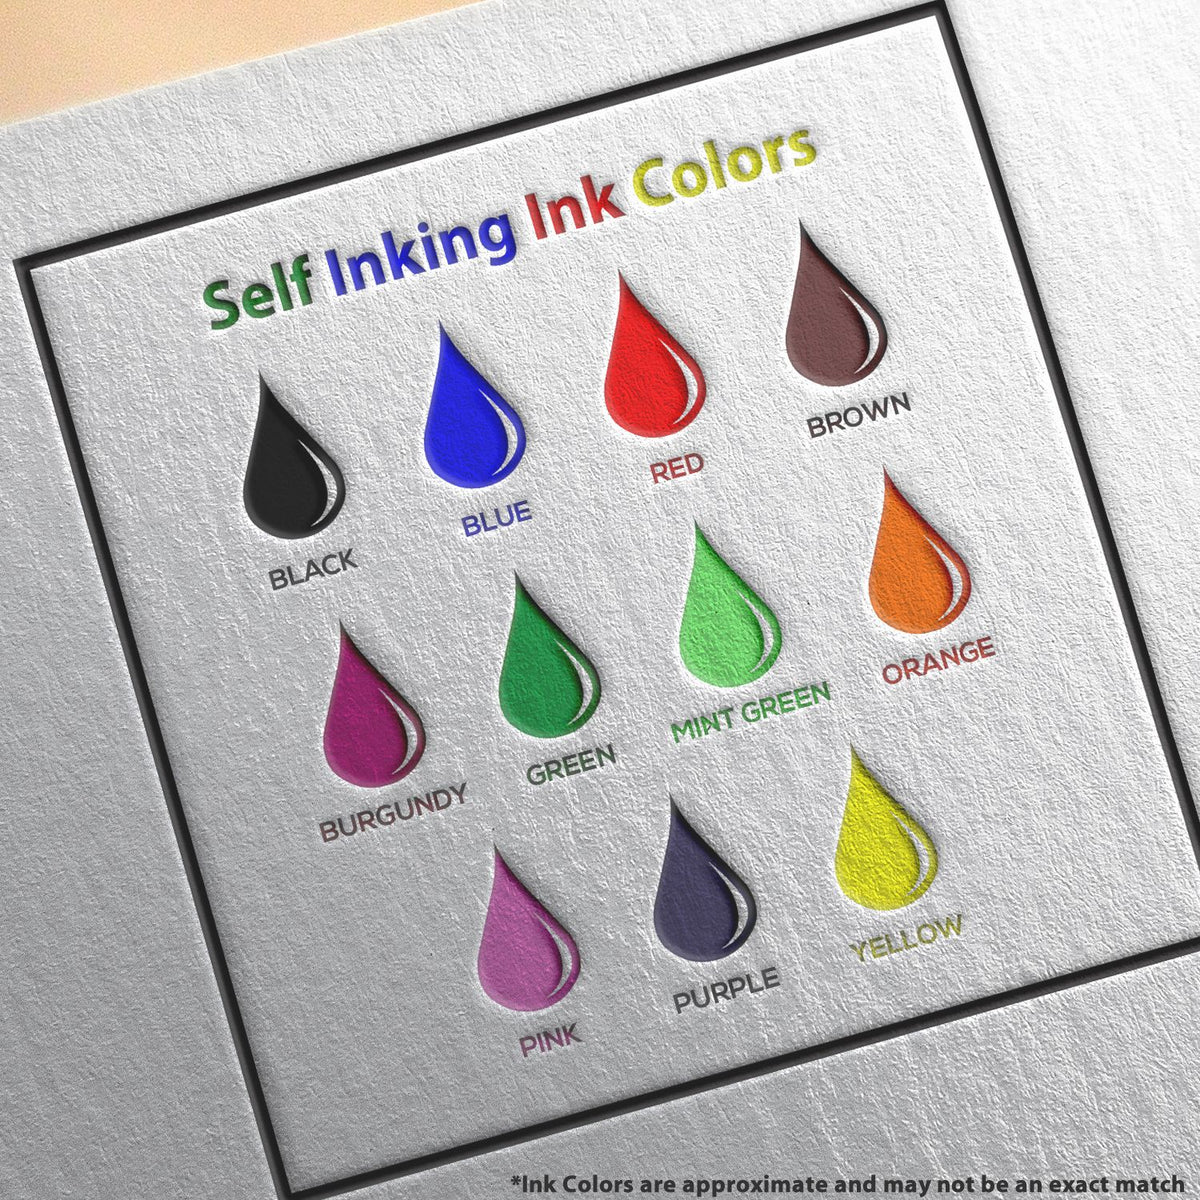 A picture showing the different ink colors or hues available for the Heavy-Duty Louisiana Rectangular Notary Stamp product.